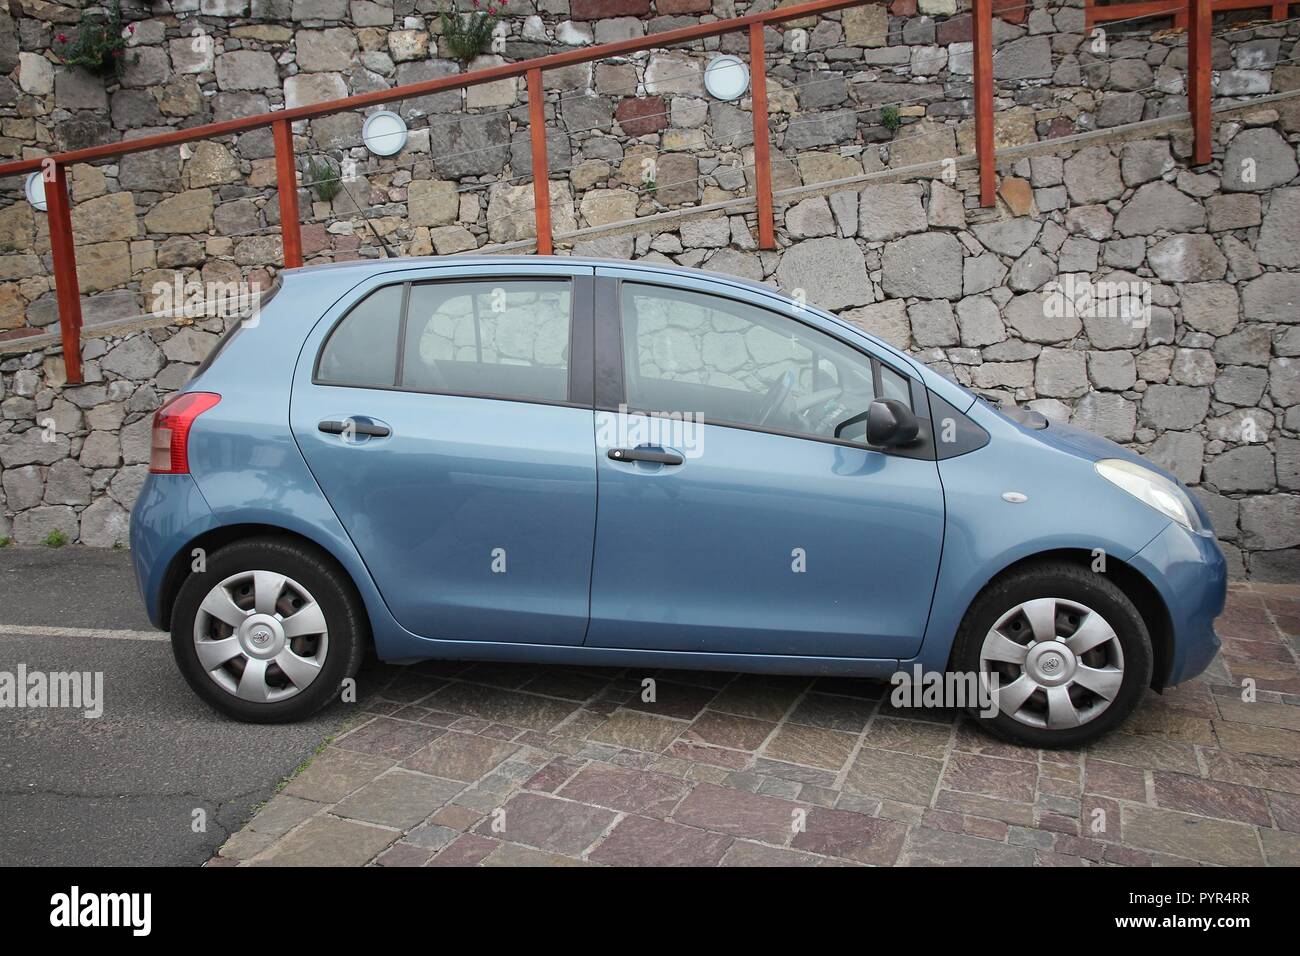 GRAN CANARIA, SPAIN - DECEMBER 5, 2015: Toyota Yaris economy car parked in Gran Canaria, Spain. There are 593 cars per capita in Spain. Stock Photo